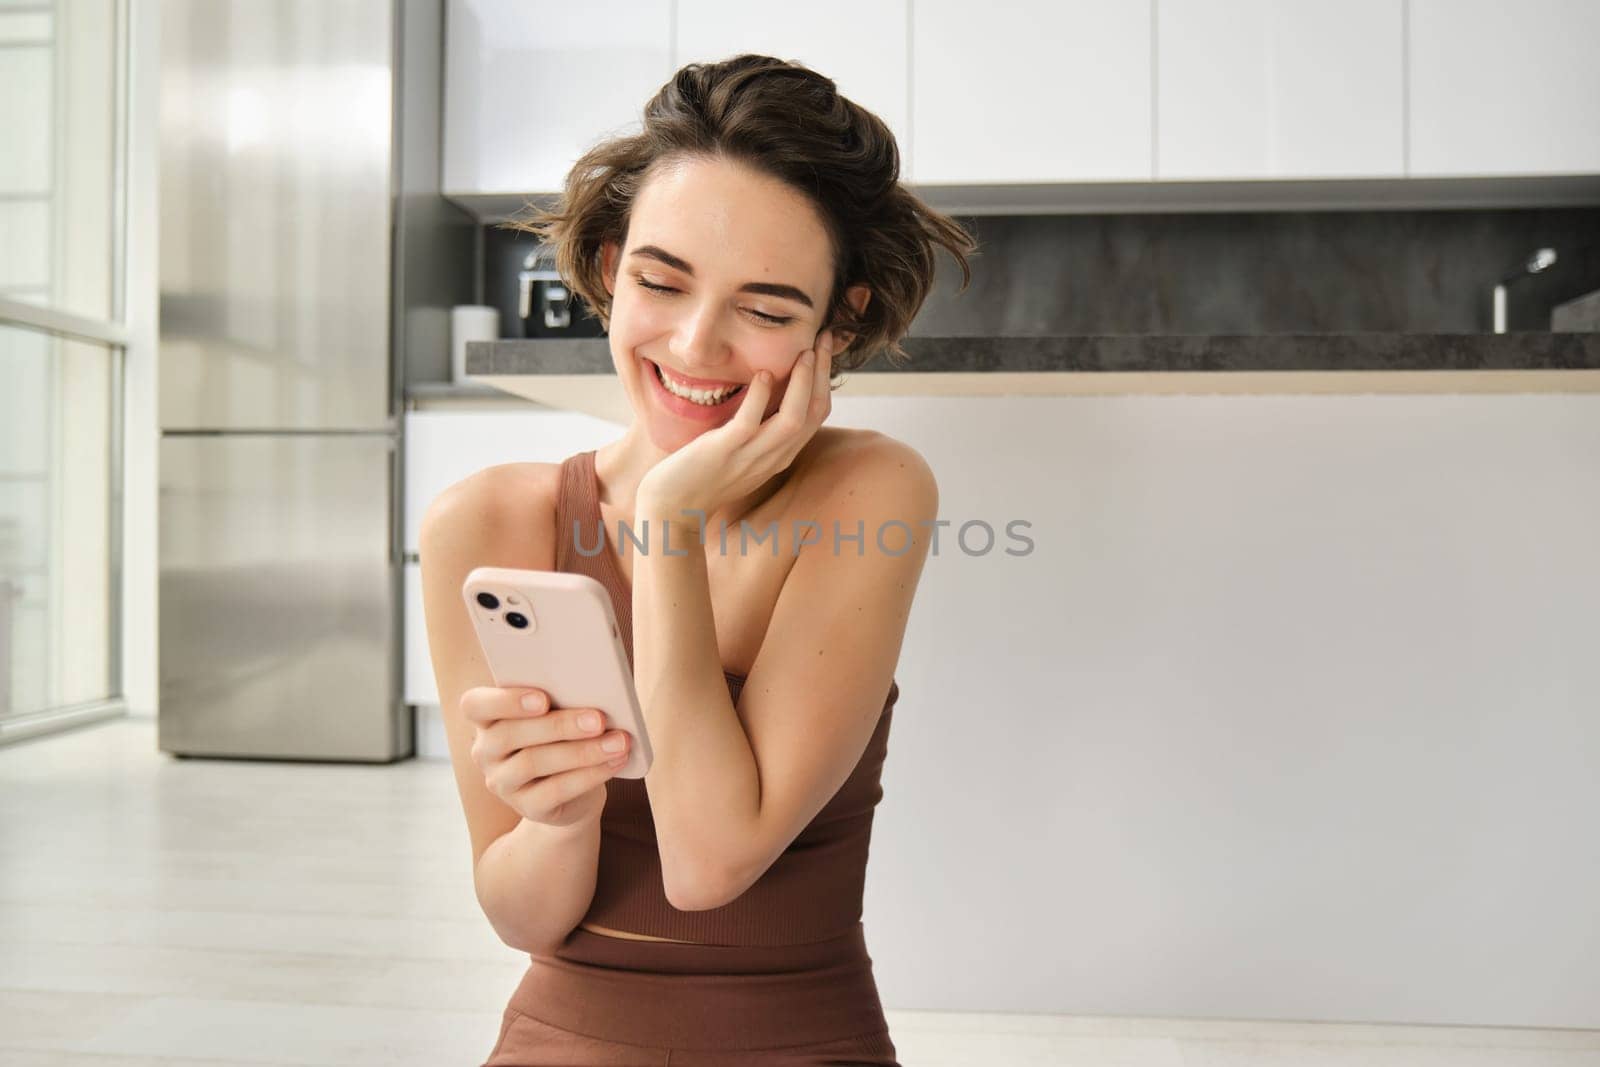 Portrait of smiling woman at home, using her mobile phone, sitting on floor in bright room, looking at smartphone and chatting, texting someone. Copy space